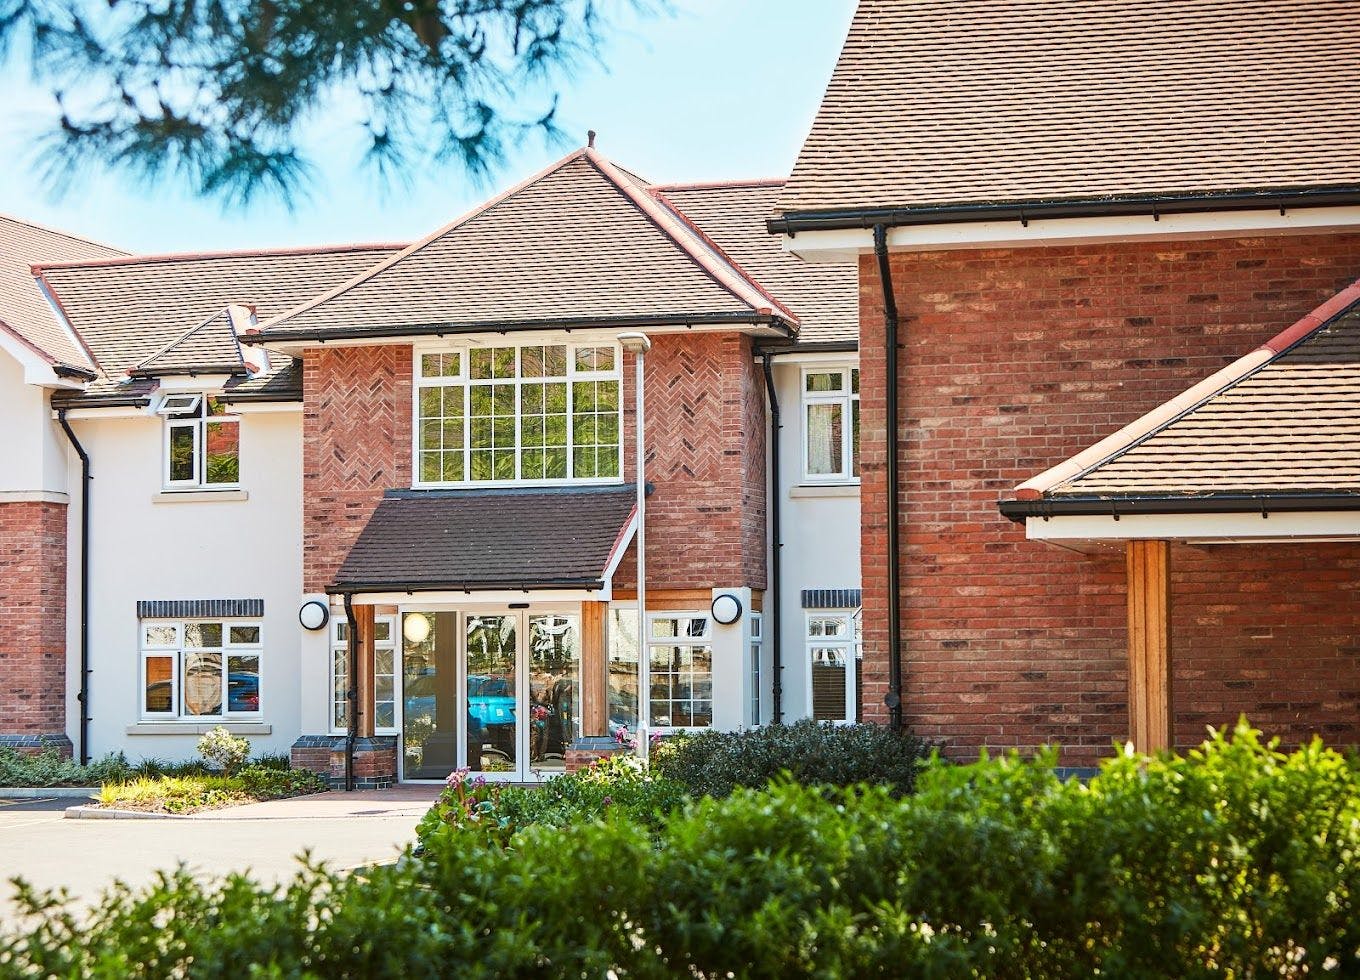 Exterior of Wickmeads care home in Bournemouth, Hampshire